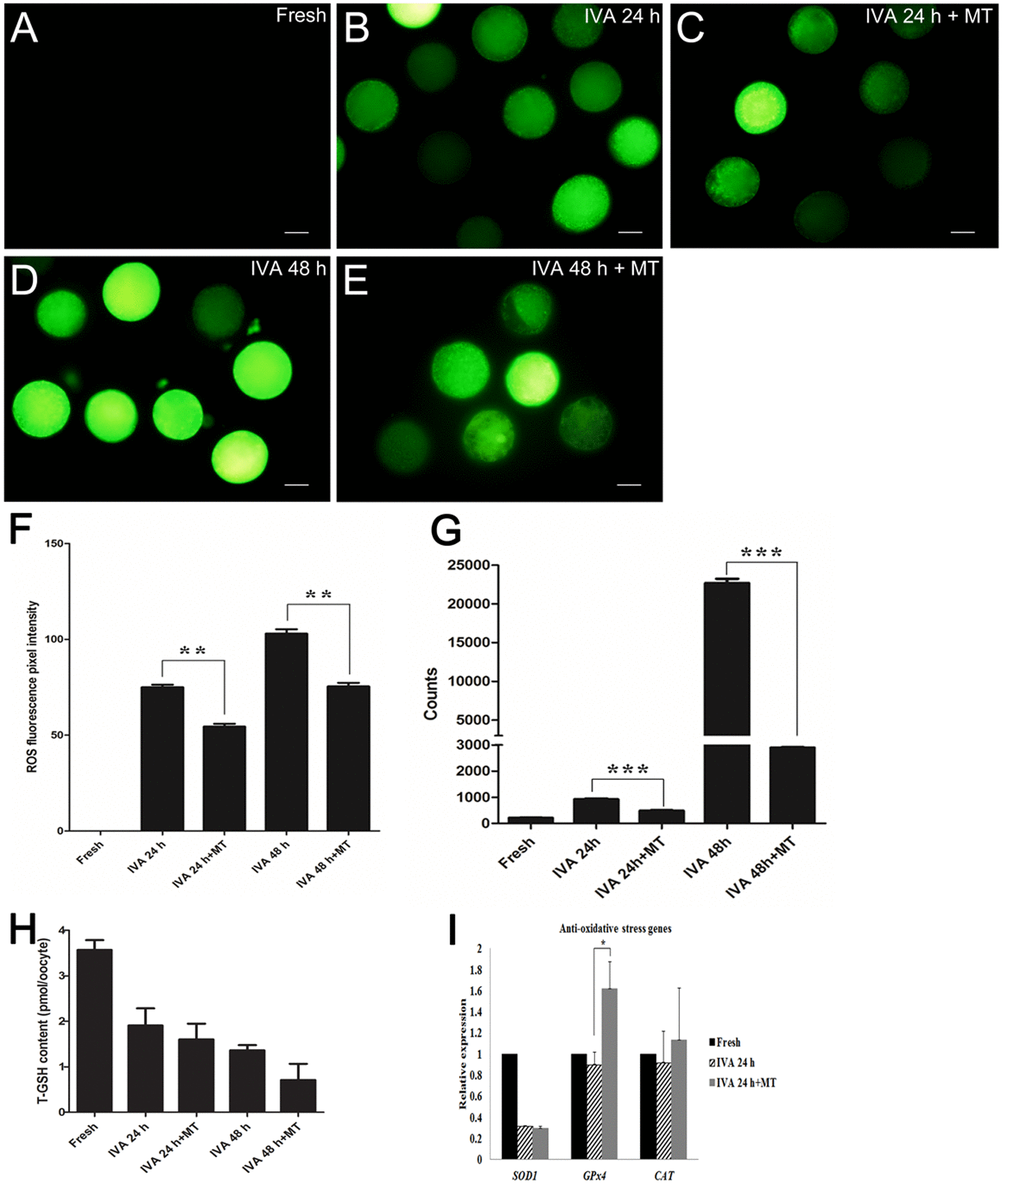 Effects of melatonin on ROS levels and total glutathione in aged oocytes. (A) Fresh oocytes. (B) Oocytes aged for 24 hr. (C) IVA 24 hr oocytes treated with 2 mM melatonin. (D) Oocytes aged for 48 hr. (E) IVA 48 hr oocytes treated with 2 mM melatonin. (F) ROS fluorescence pixel intensity in IVA oocytes. (G) ROS level (counts of photons) detection of single cell by optical nanoprobes. (H) Total glutathione (T-GSH) content in fresh and IVA oocytes. (I) The expression of anti-oxidative stress genes (SOD1, GPx4 and CAT) in fresh and aged oocytes. All graphs show mean ± s.e.m. Abbreviations used in this and all subsequent figures: ROS, reactive oxygen species. Independent replicates were conducted with a minimum of 30 oocytes/replicate, at least 3 stable replicates were obtained. **P 